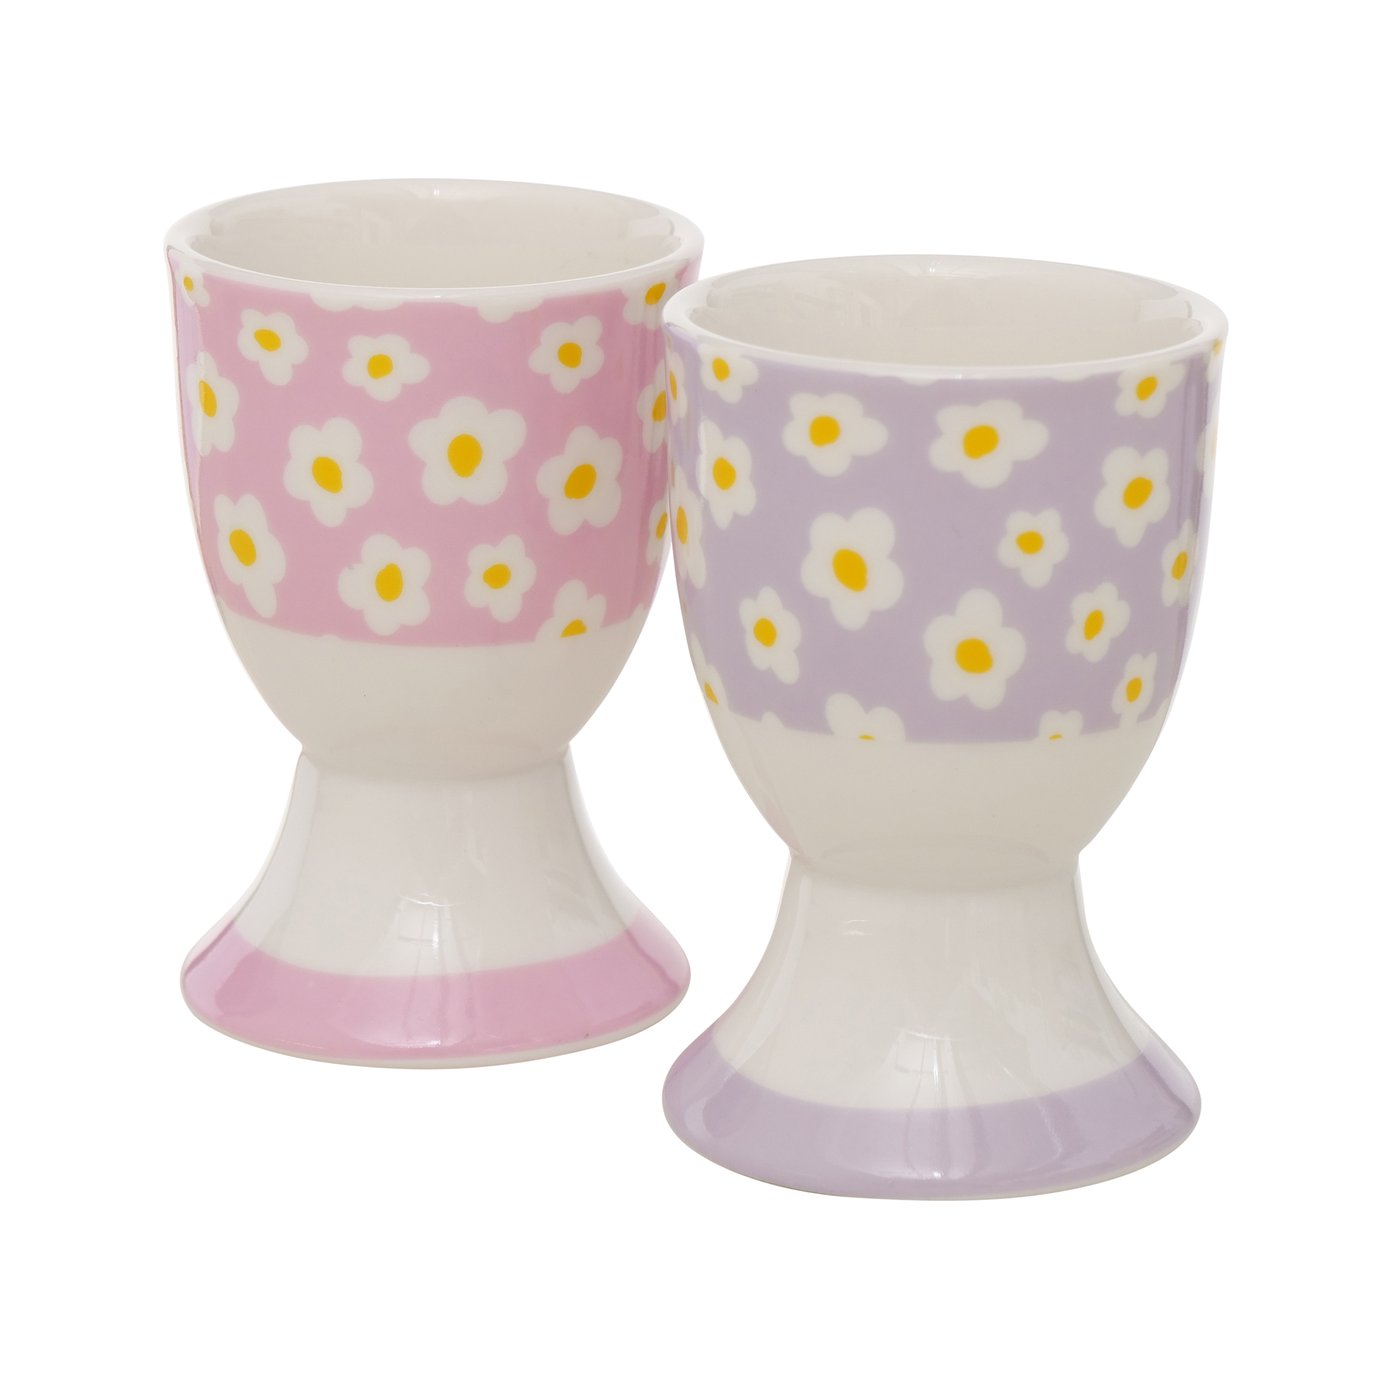 andquirky-flower-egg-cup-pink-or-purple